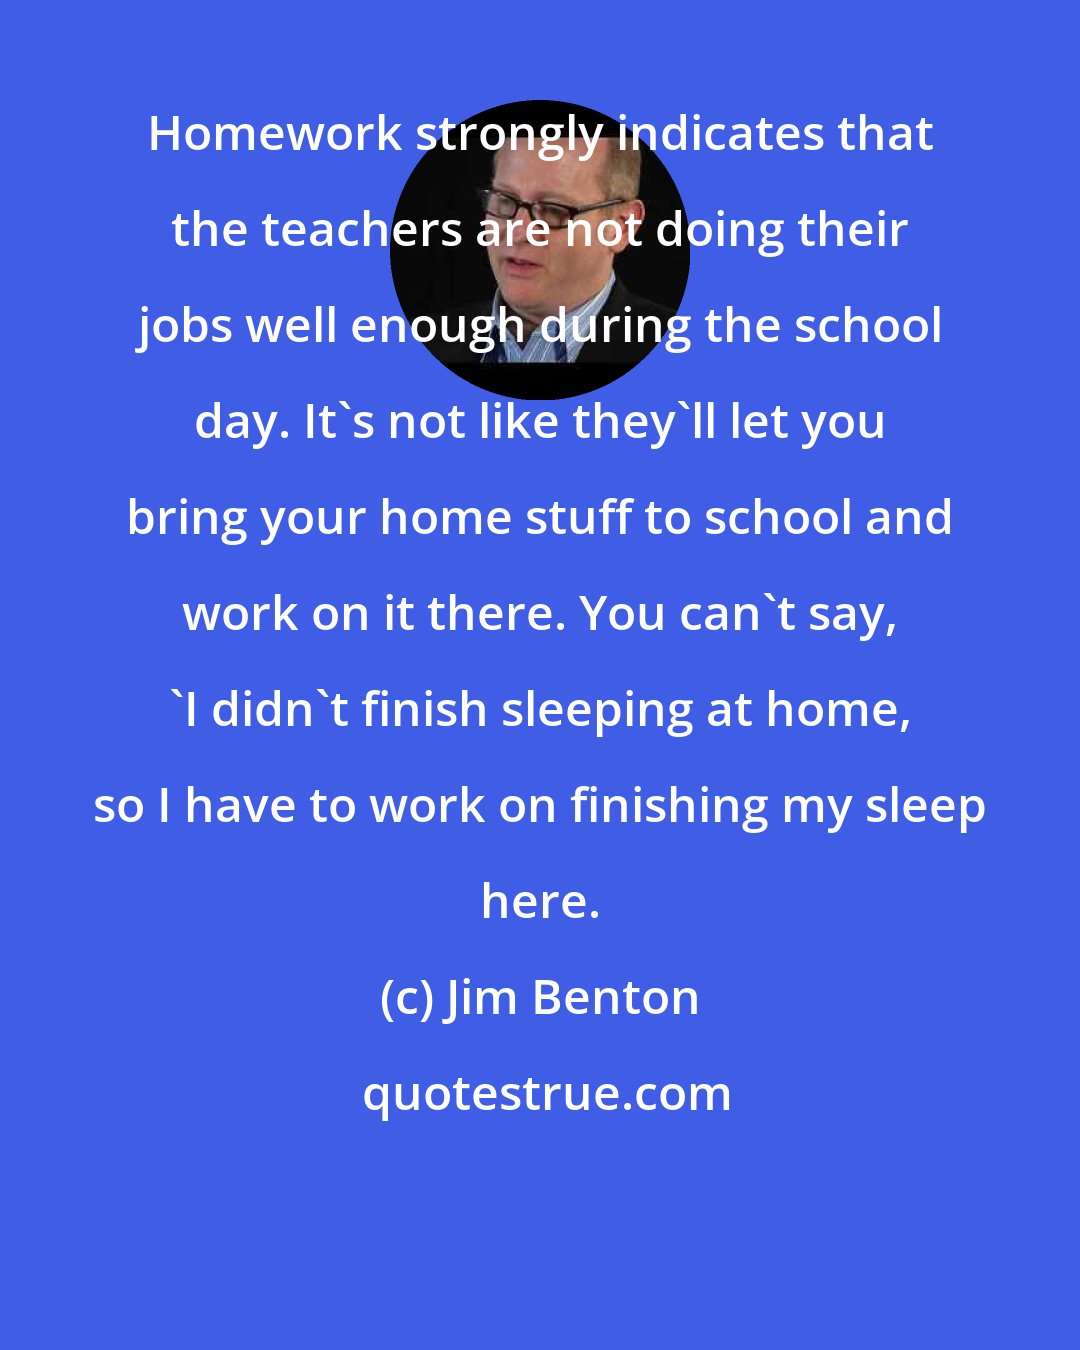 Jim Benton: Homework strongly indicates that the teachers are not doing their jobs well enough during the school day. It's not like they'll let you bring your home stuff to school and work on it there. You can't say, 'I didn't finish sleeping at home, so I have to work on finishing my sleep here.